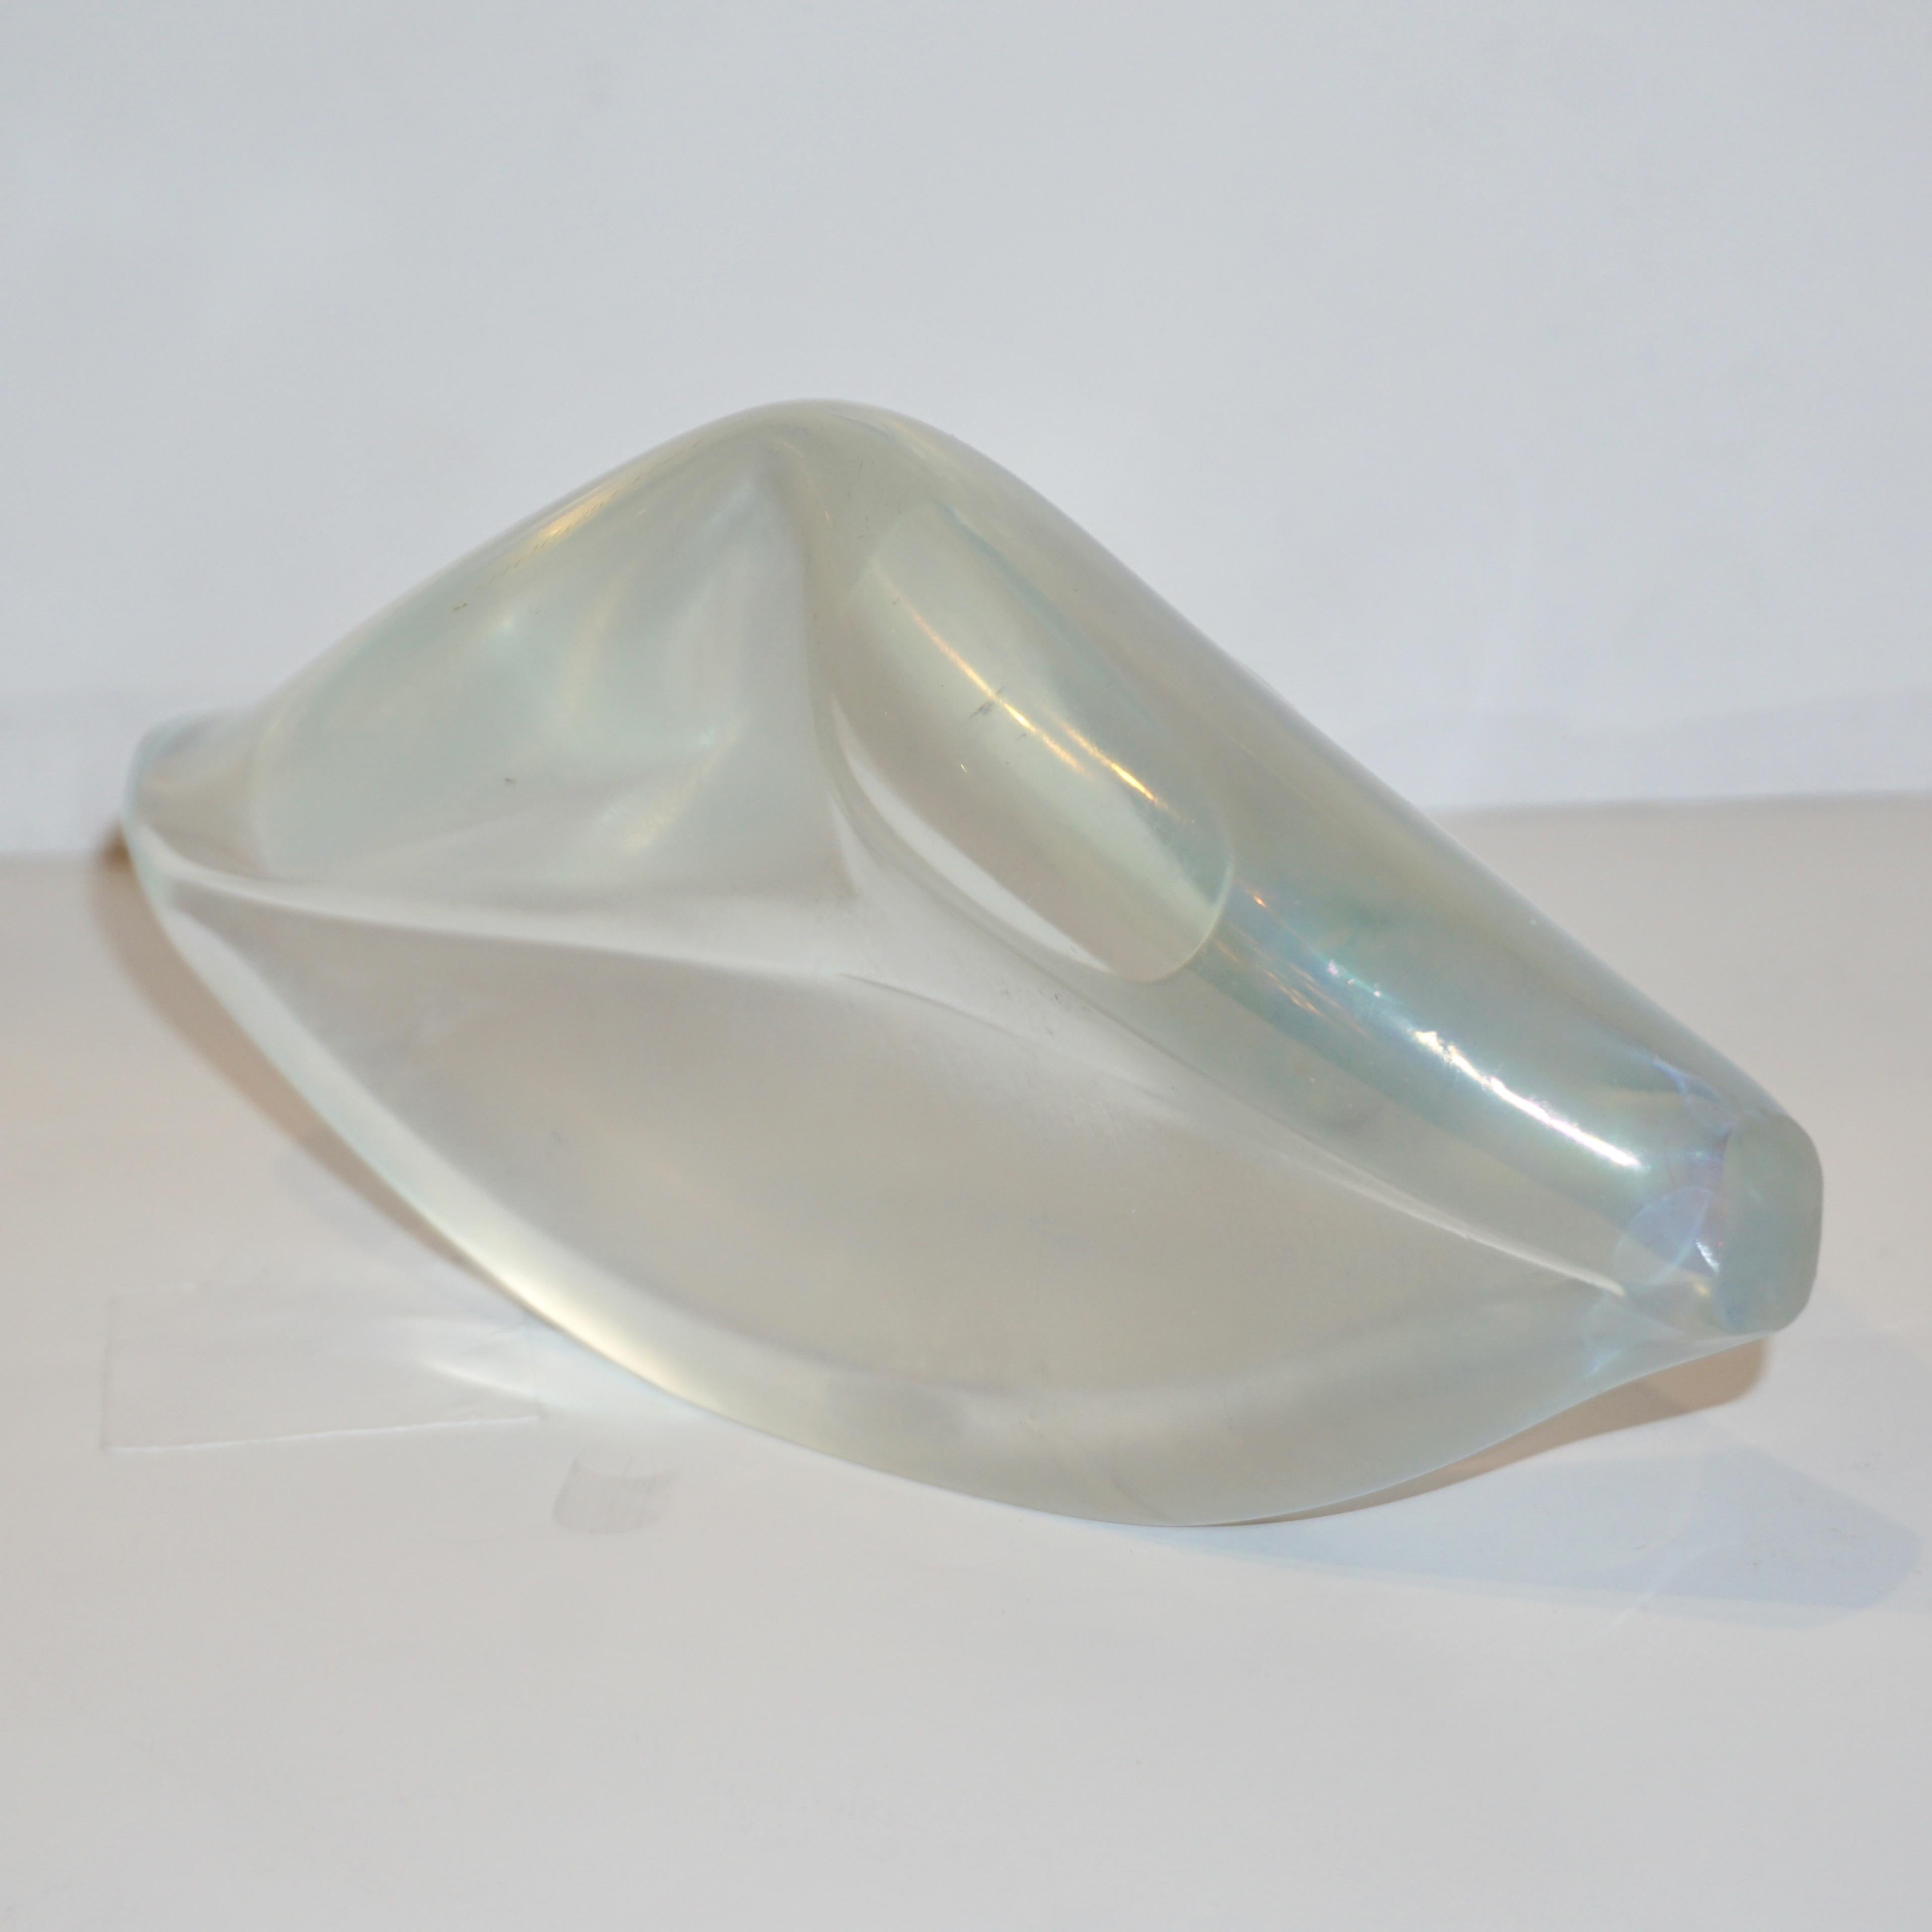 Modern Pop Art sculpture, exclusive for Cosulich Interiors, in blown Murano glass by Alberto Donà Studio, handcrafted in Italy, in the shape of lips, made more realistic by the use of a translucent crystal glass.
A very interesting fun object with